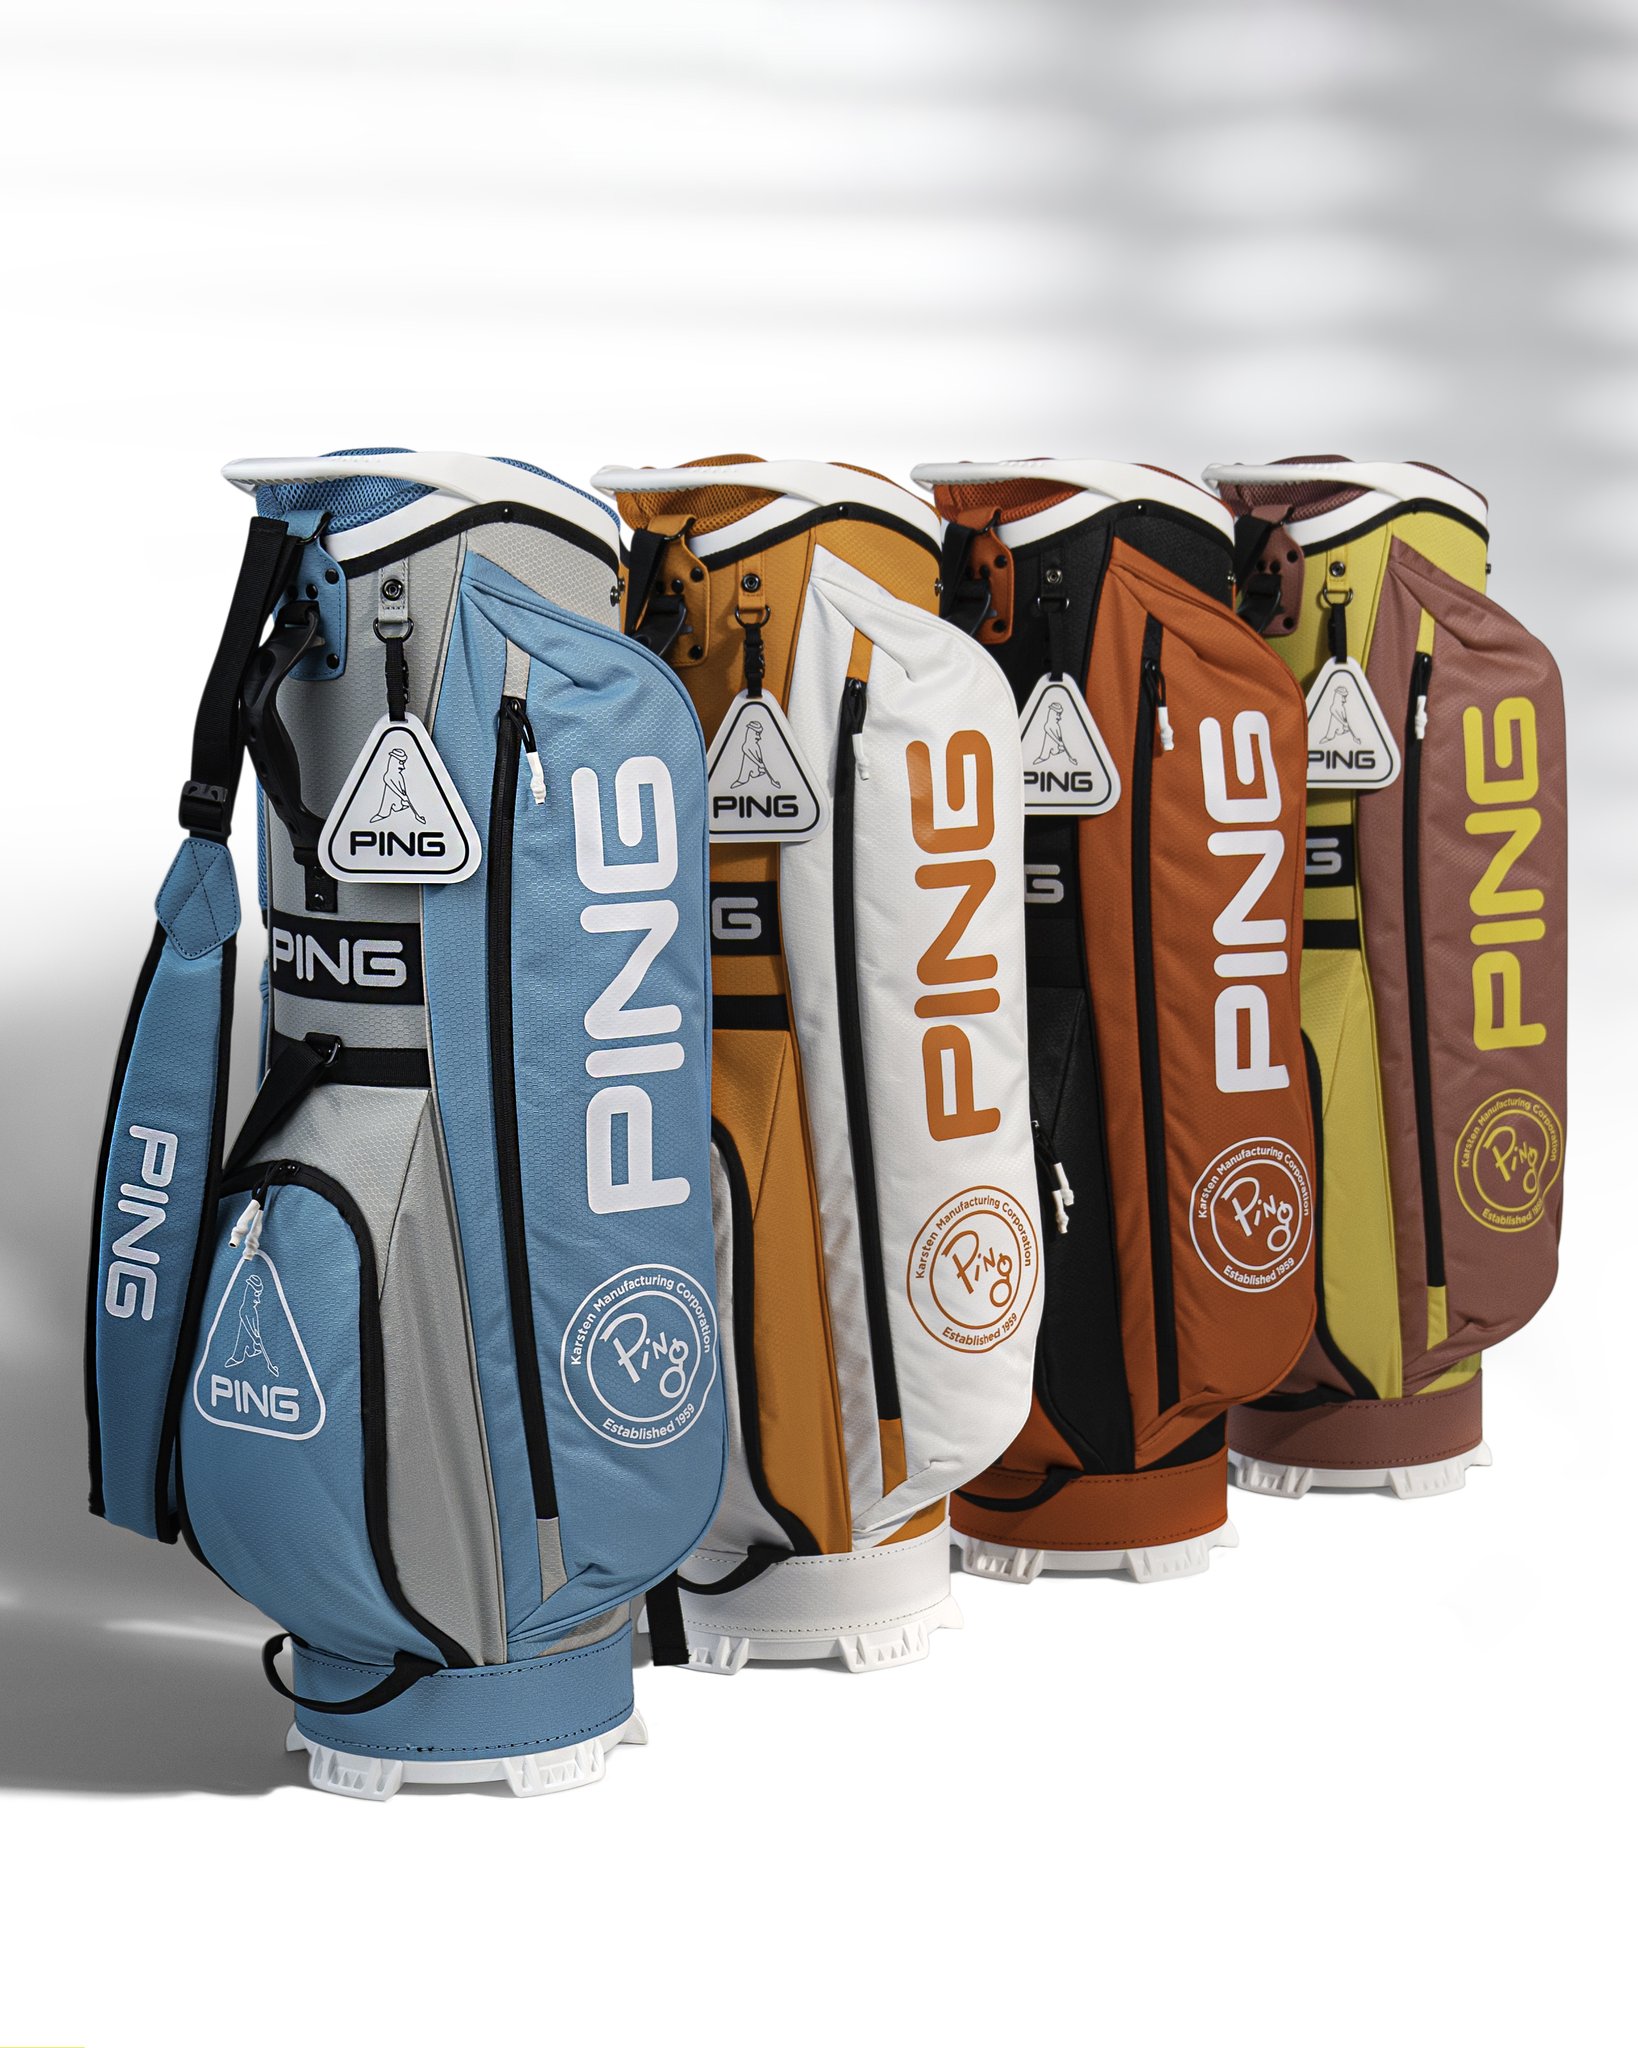 Discover the Incredible New Ping Cart Bag Range! - YouTube